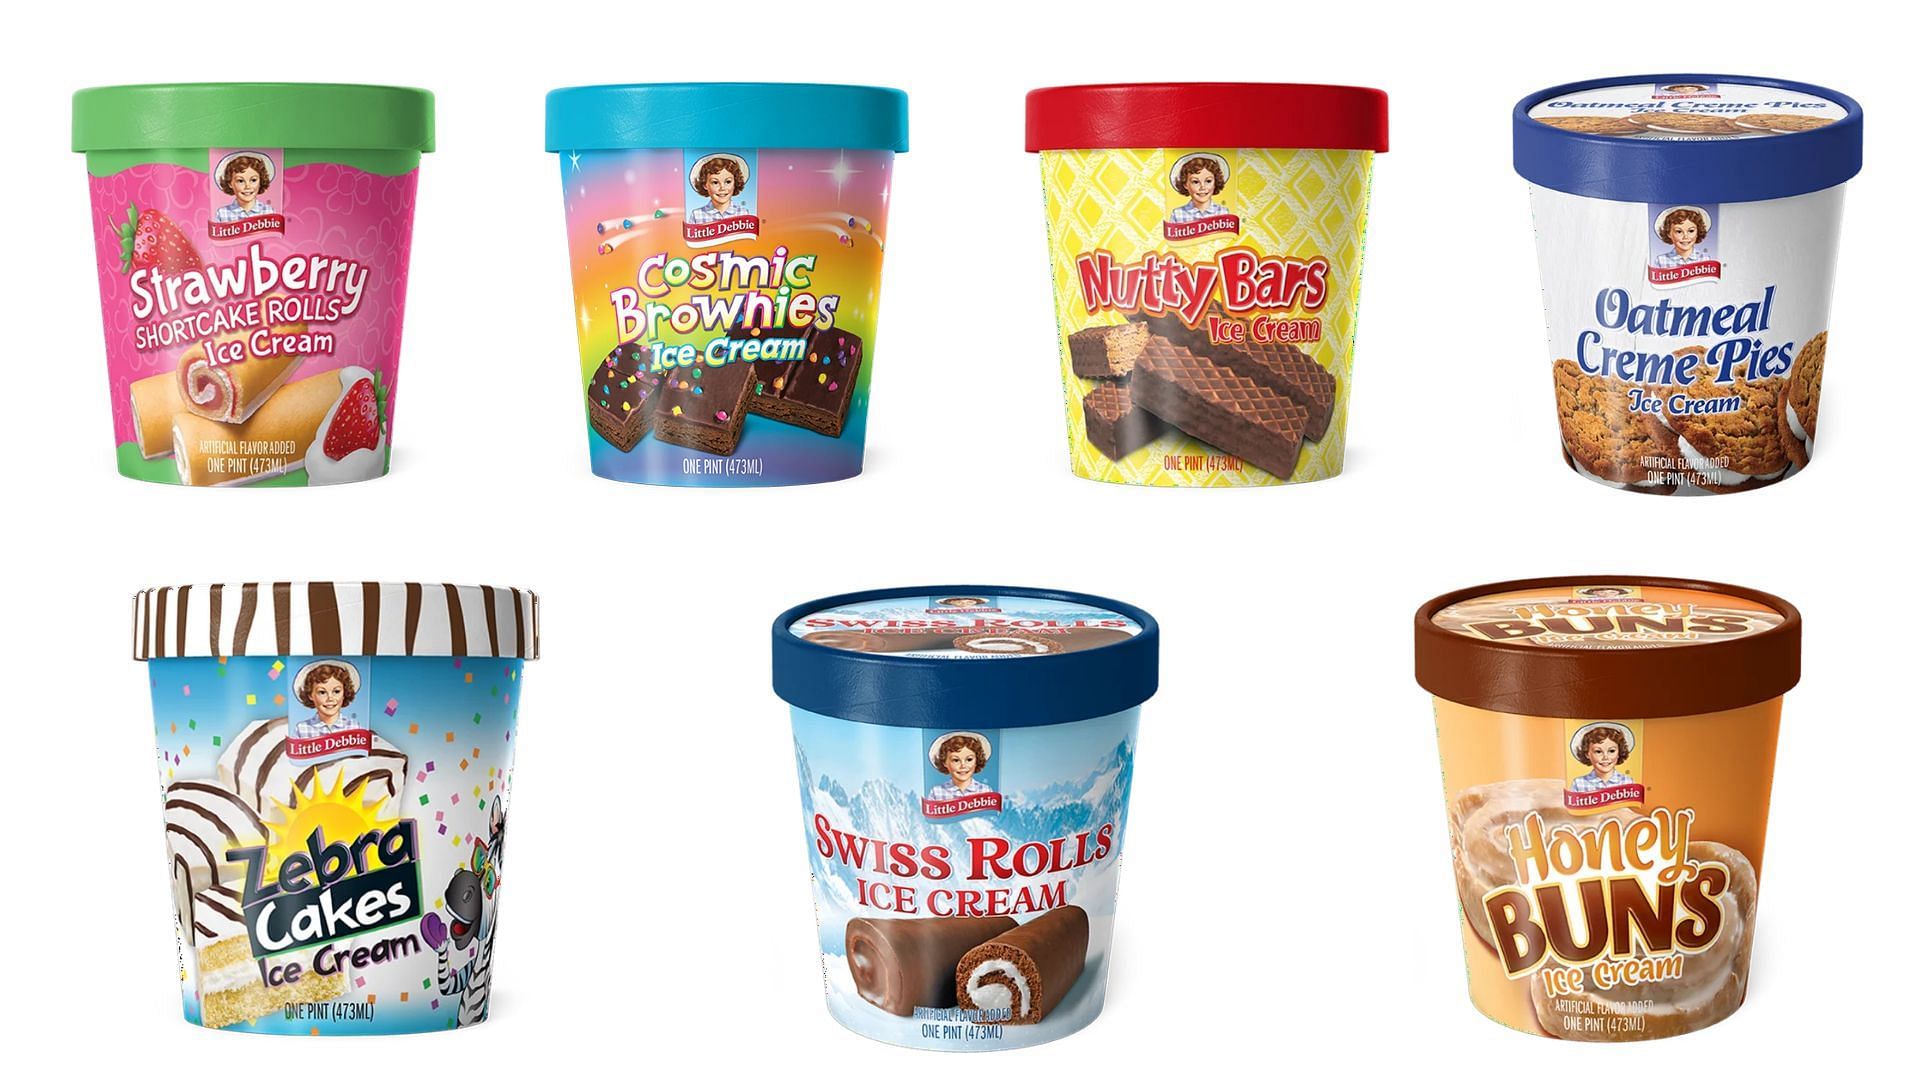 7 flavors of ice creams launched last year (Promotional Image via Little Debbie)